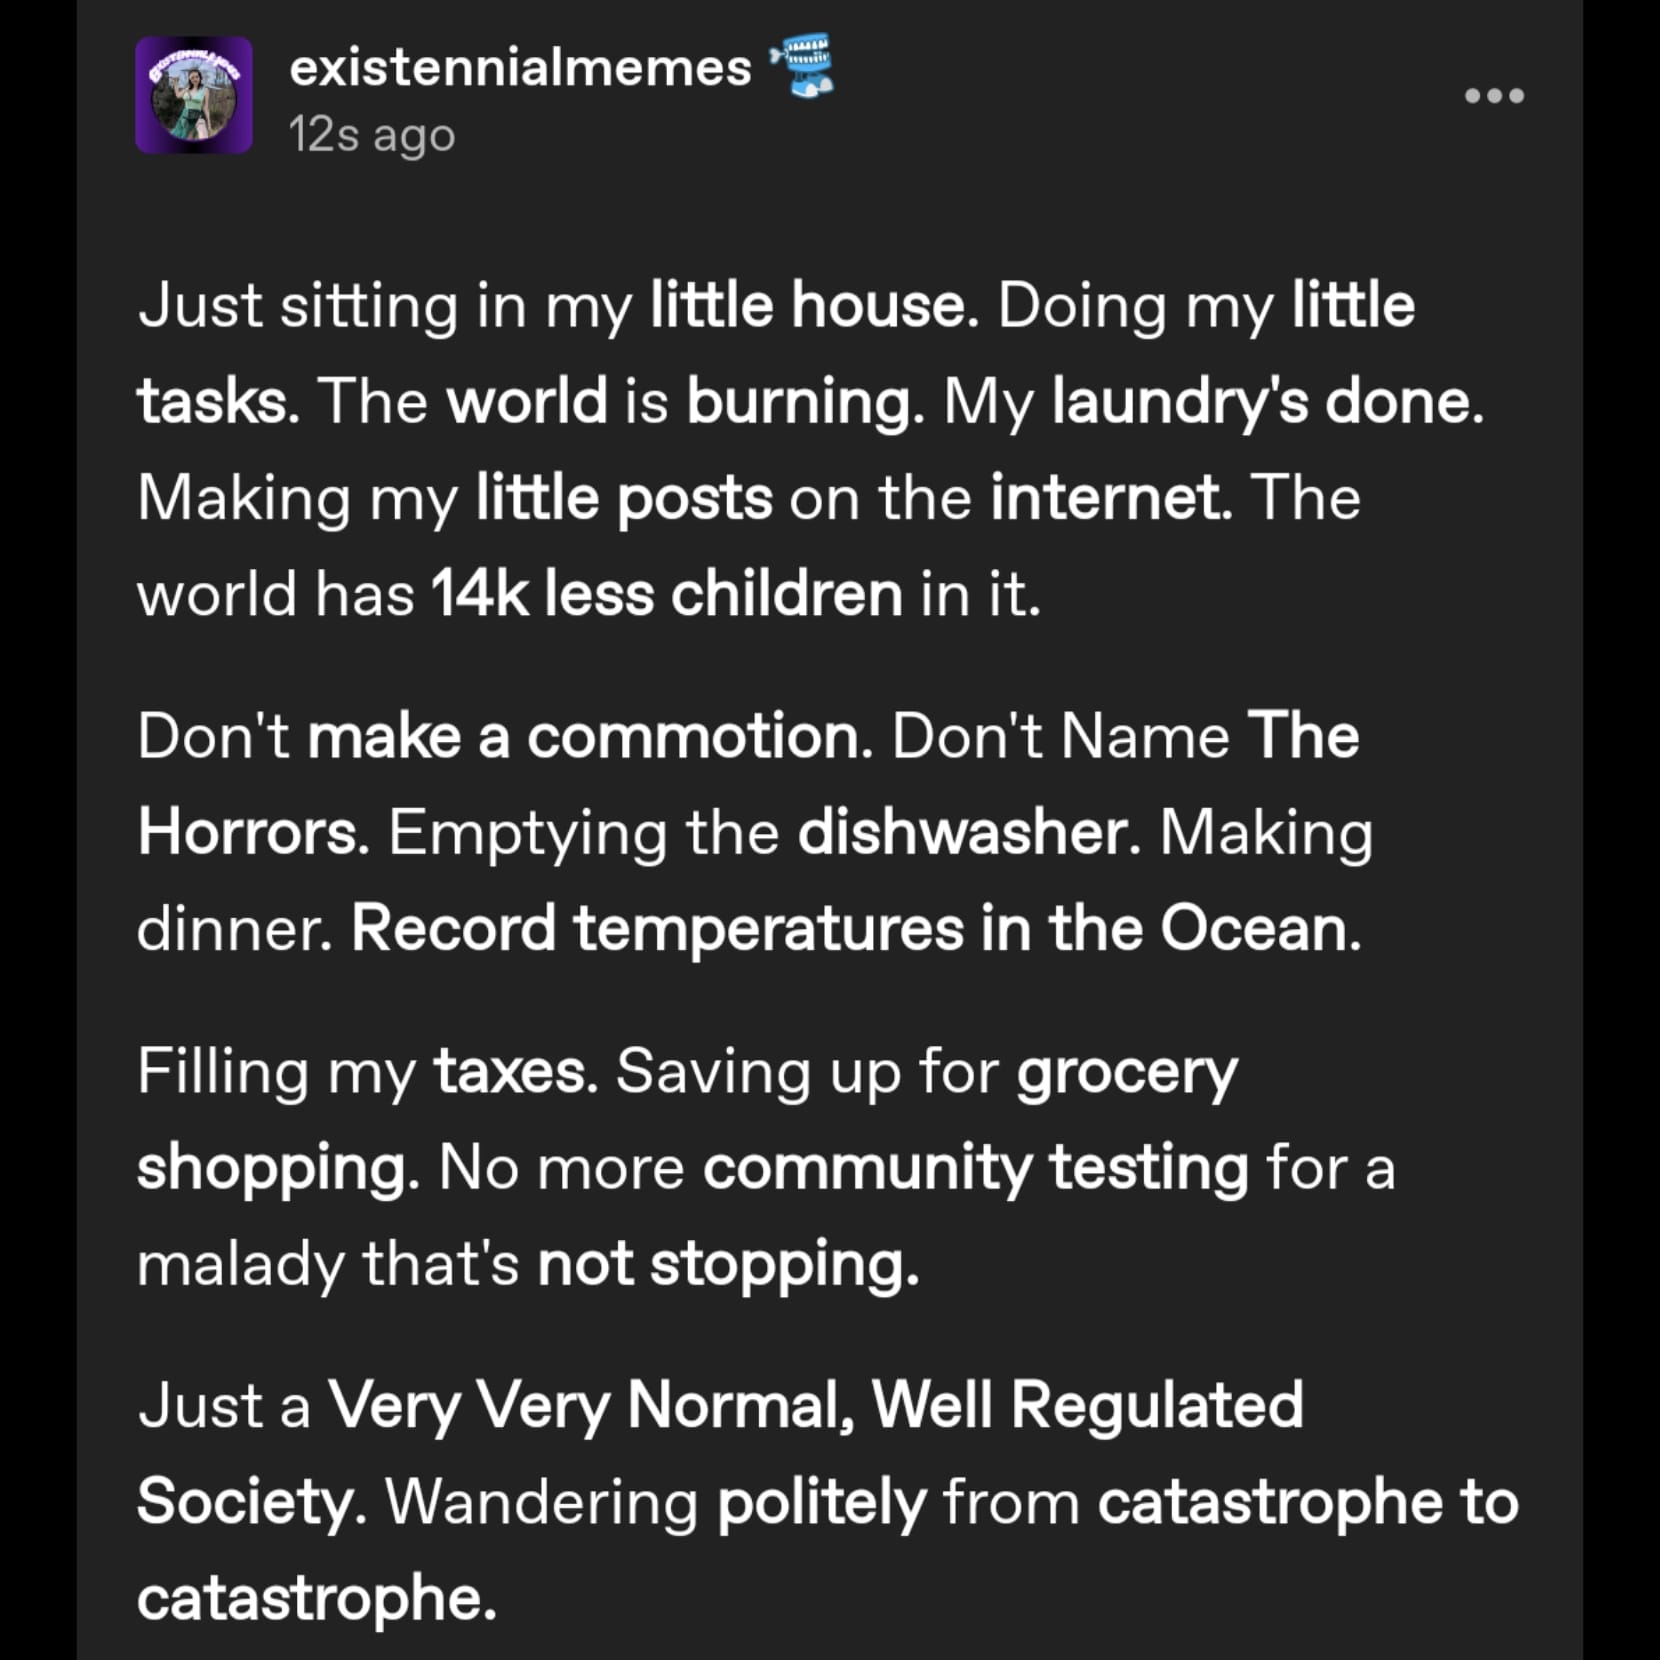 a tumblr post by user existennialmemes that reads: Just sitting in my little house. Doing my little tasks. The world is burning. My laundry's done. Making my little posts on the internet. The world has 14k less children in it. 

Don't make a commotion. Don't Name The Horrors. Emptying the dishwasher. Making dinner. Record temperatures in the Ocean. 

Filling my taxes. Saving up for grocery shopping. No more community testing for a malady that's not stopping. 

Just a Very Very Normal, Well Regulated Society. Wandering politely from catastrophe to catastrophe.